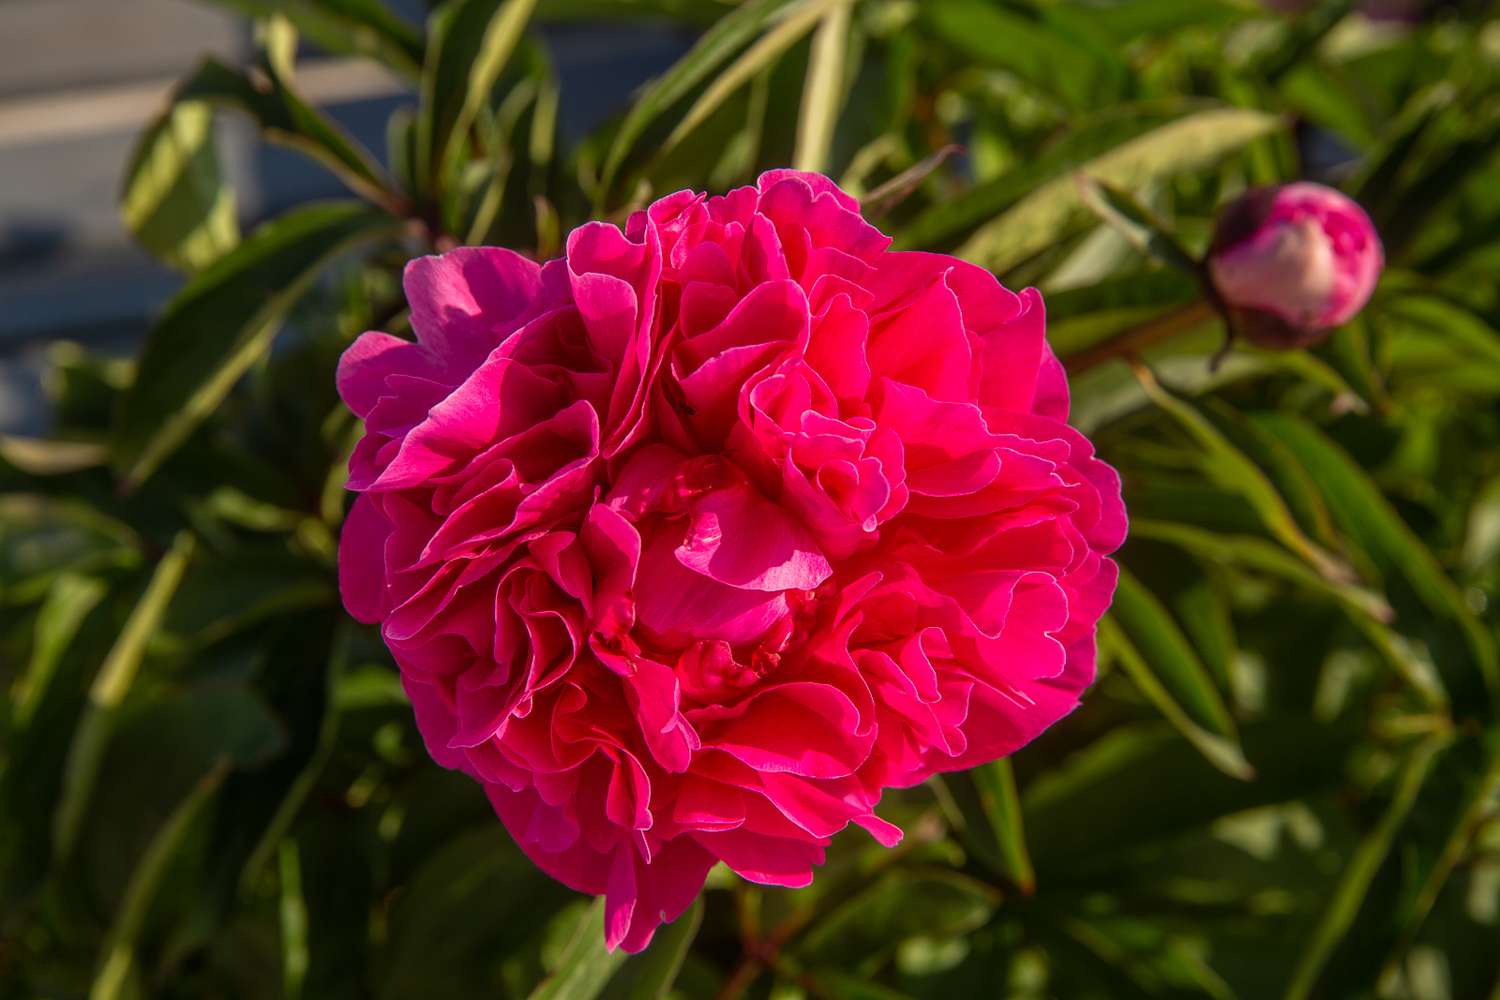 Pink peony flower with ruffled petals surrounded by leaves and pink bud closeup